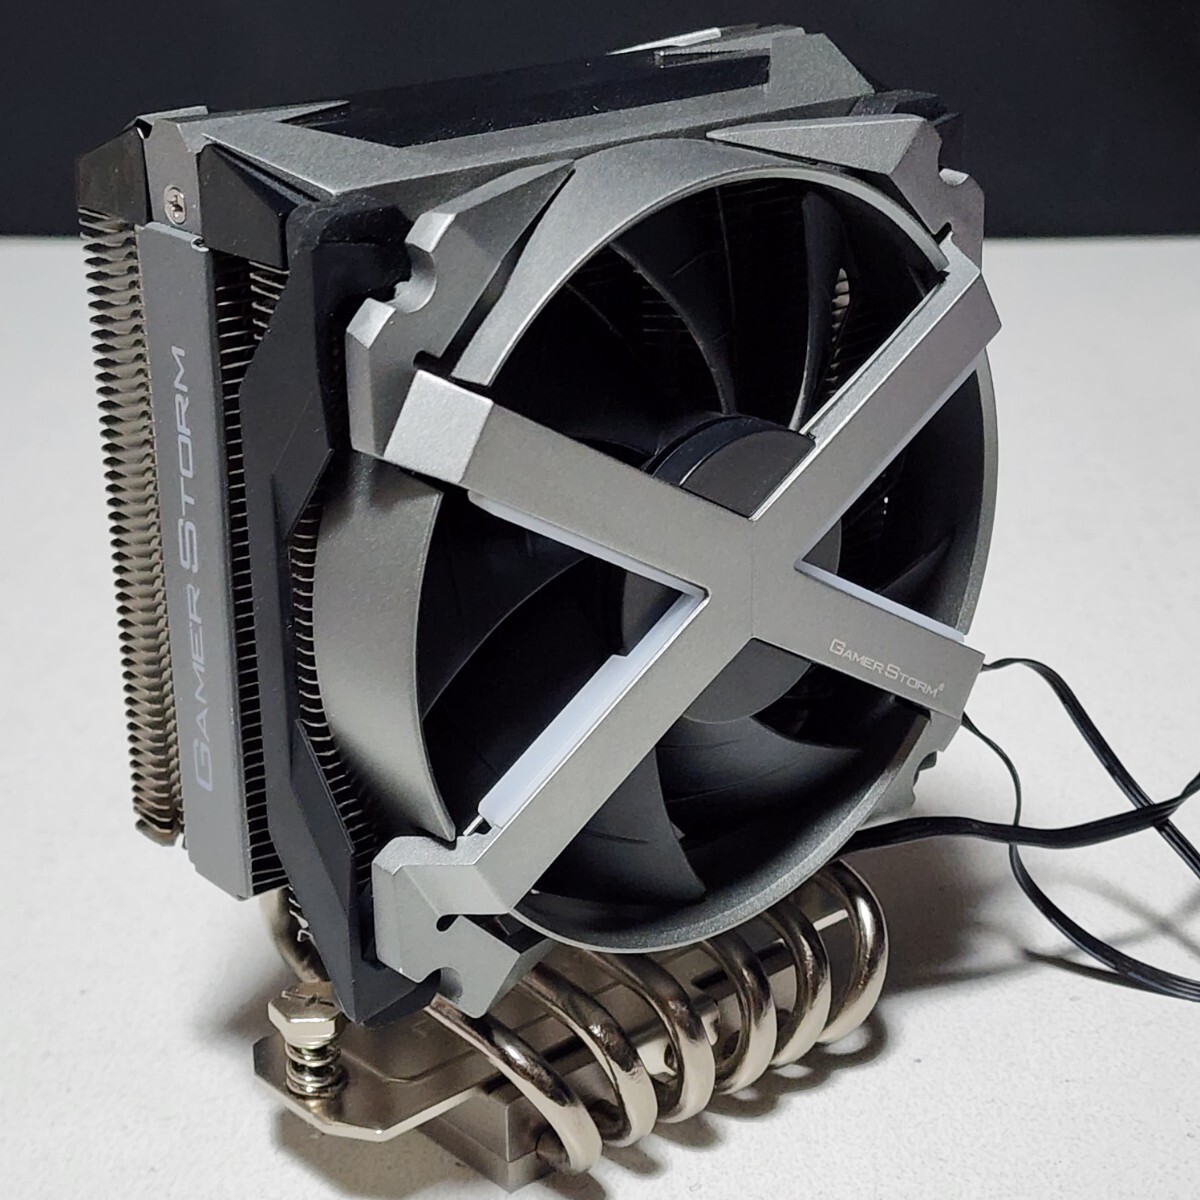 [ free shipping ]DEEPCOOL GAMER STORM FRYZEN(DP-GS-MCH6N-FZN-A) side flow type CPU cooler,air conditioner ARGB Socket AM4*TR4 etc. correspondence PC parts 